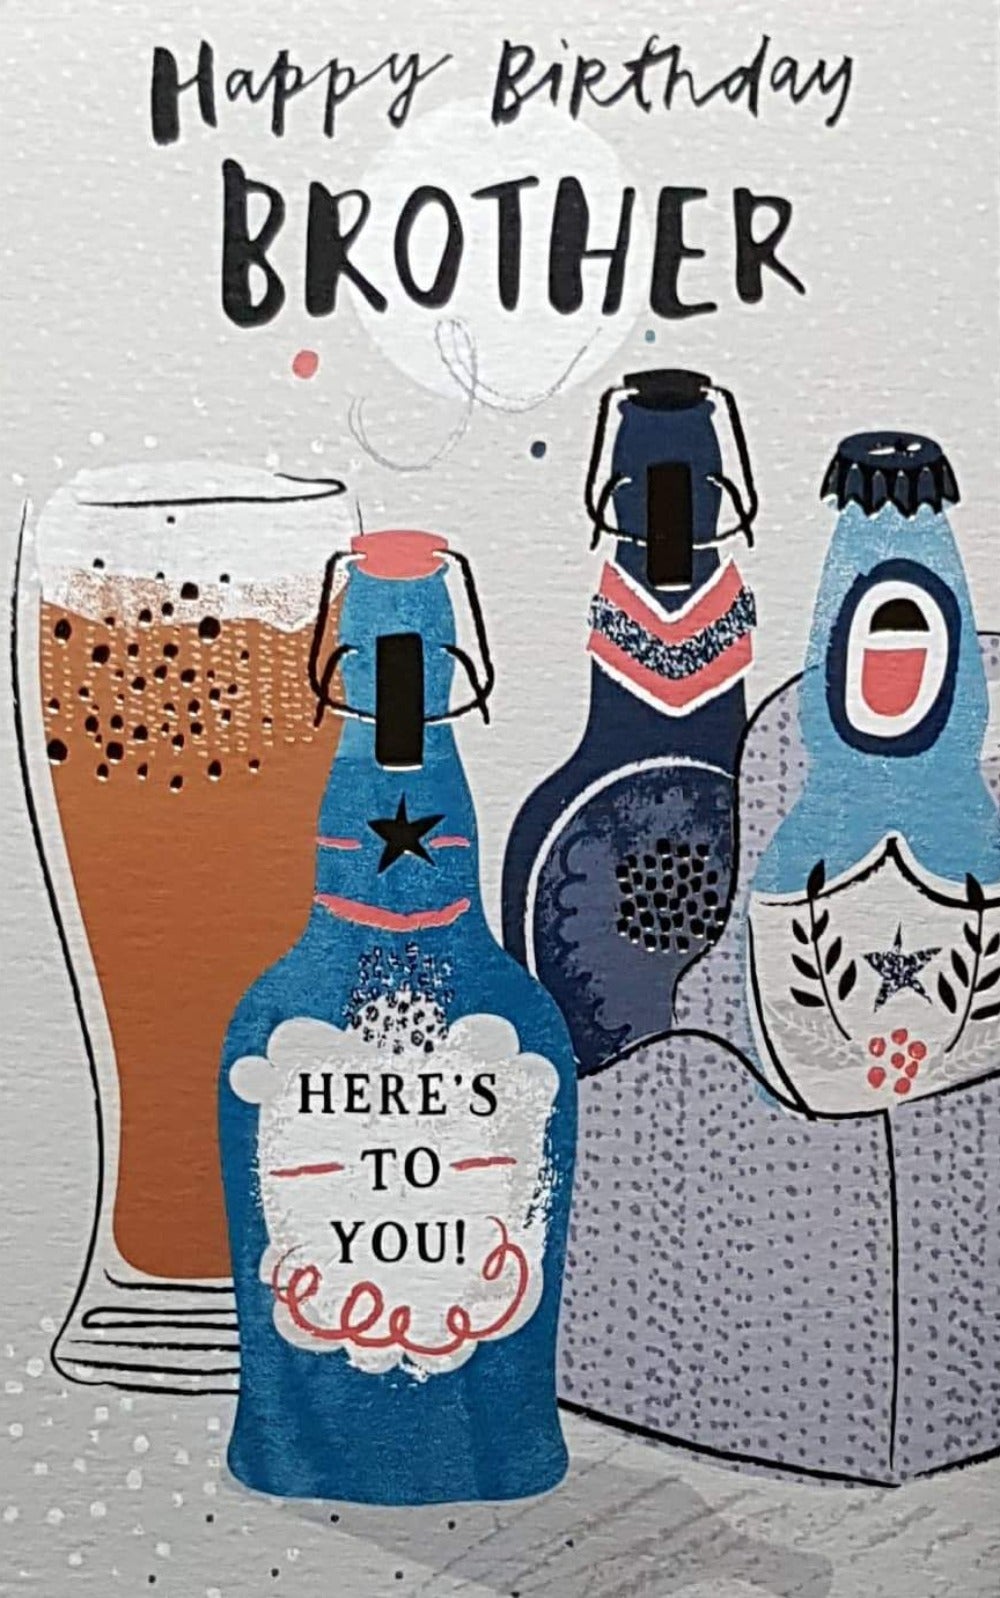 Birthday Card - Brother / Alcohol Bottles & A Beer Glass